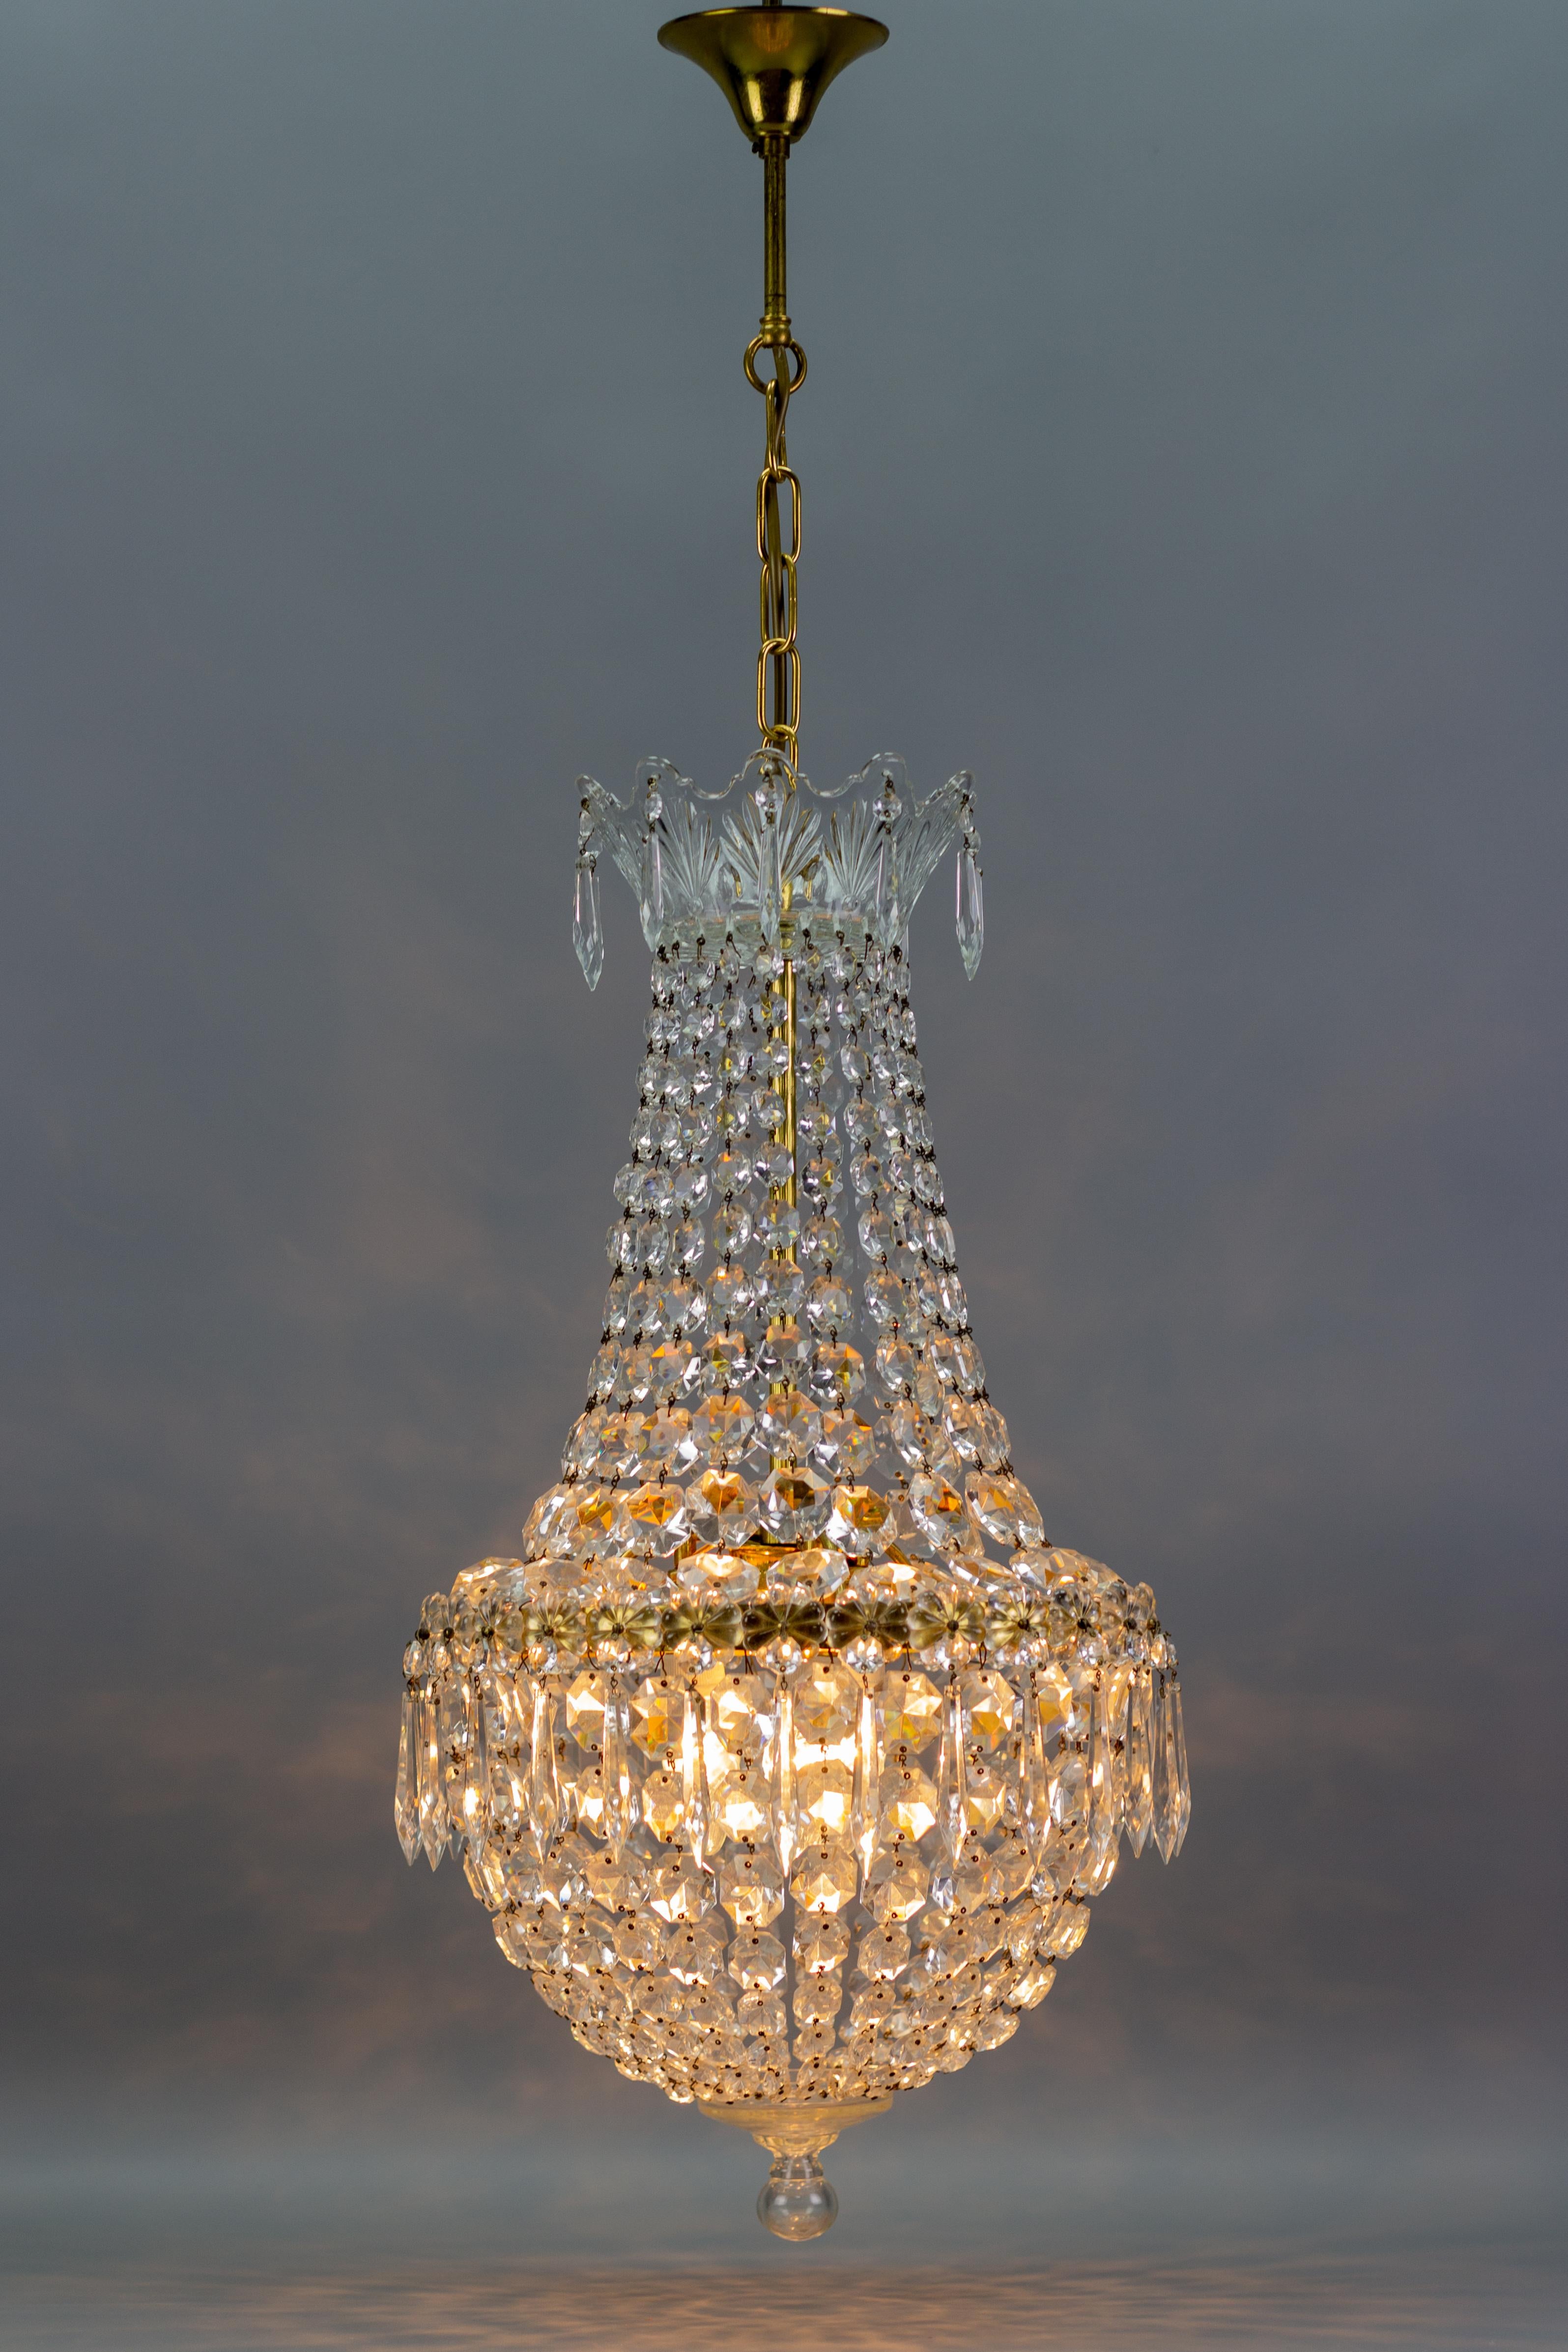 Stunning French three-light crystal glass and brass basket-shaped chandelier from the 1950s. This beautiful piece has a brass frame hung with chains of crystal glass beads forming a basket shape and reflecting the light beautifully. The crown is